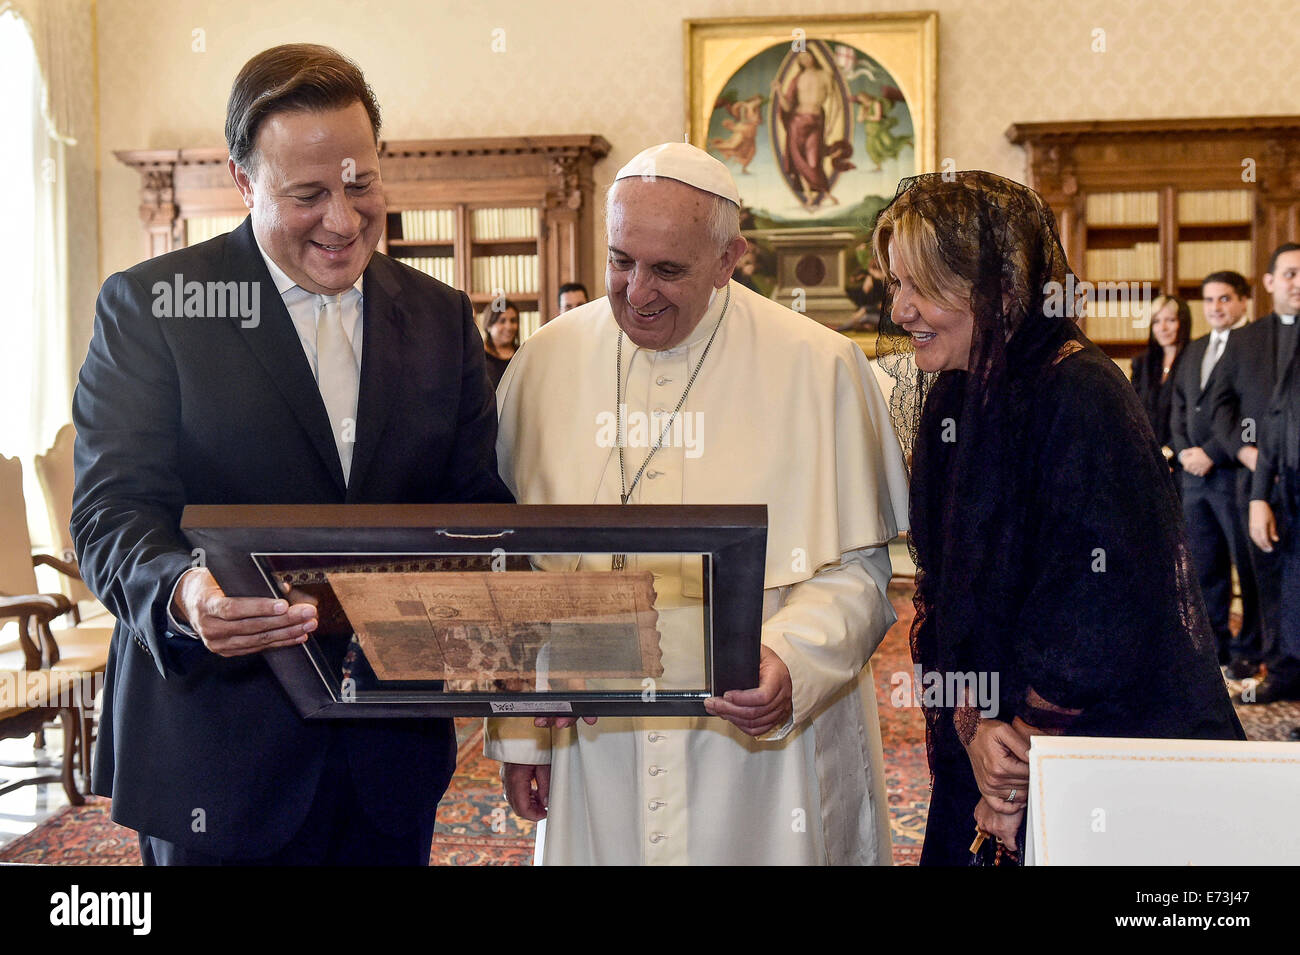 Vatican City 05th September 2014 Pope Francis meets with the President of the Republic of Panama, S.E. Mr. Juan Carlos VARELA Credit:  Realy Easy Star/Alamy Live News Stock Photo